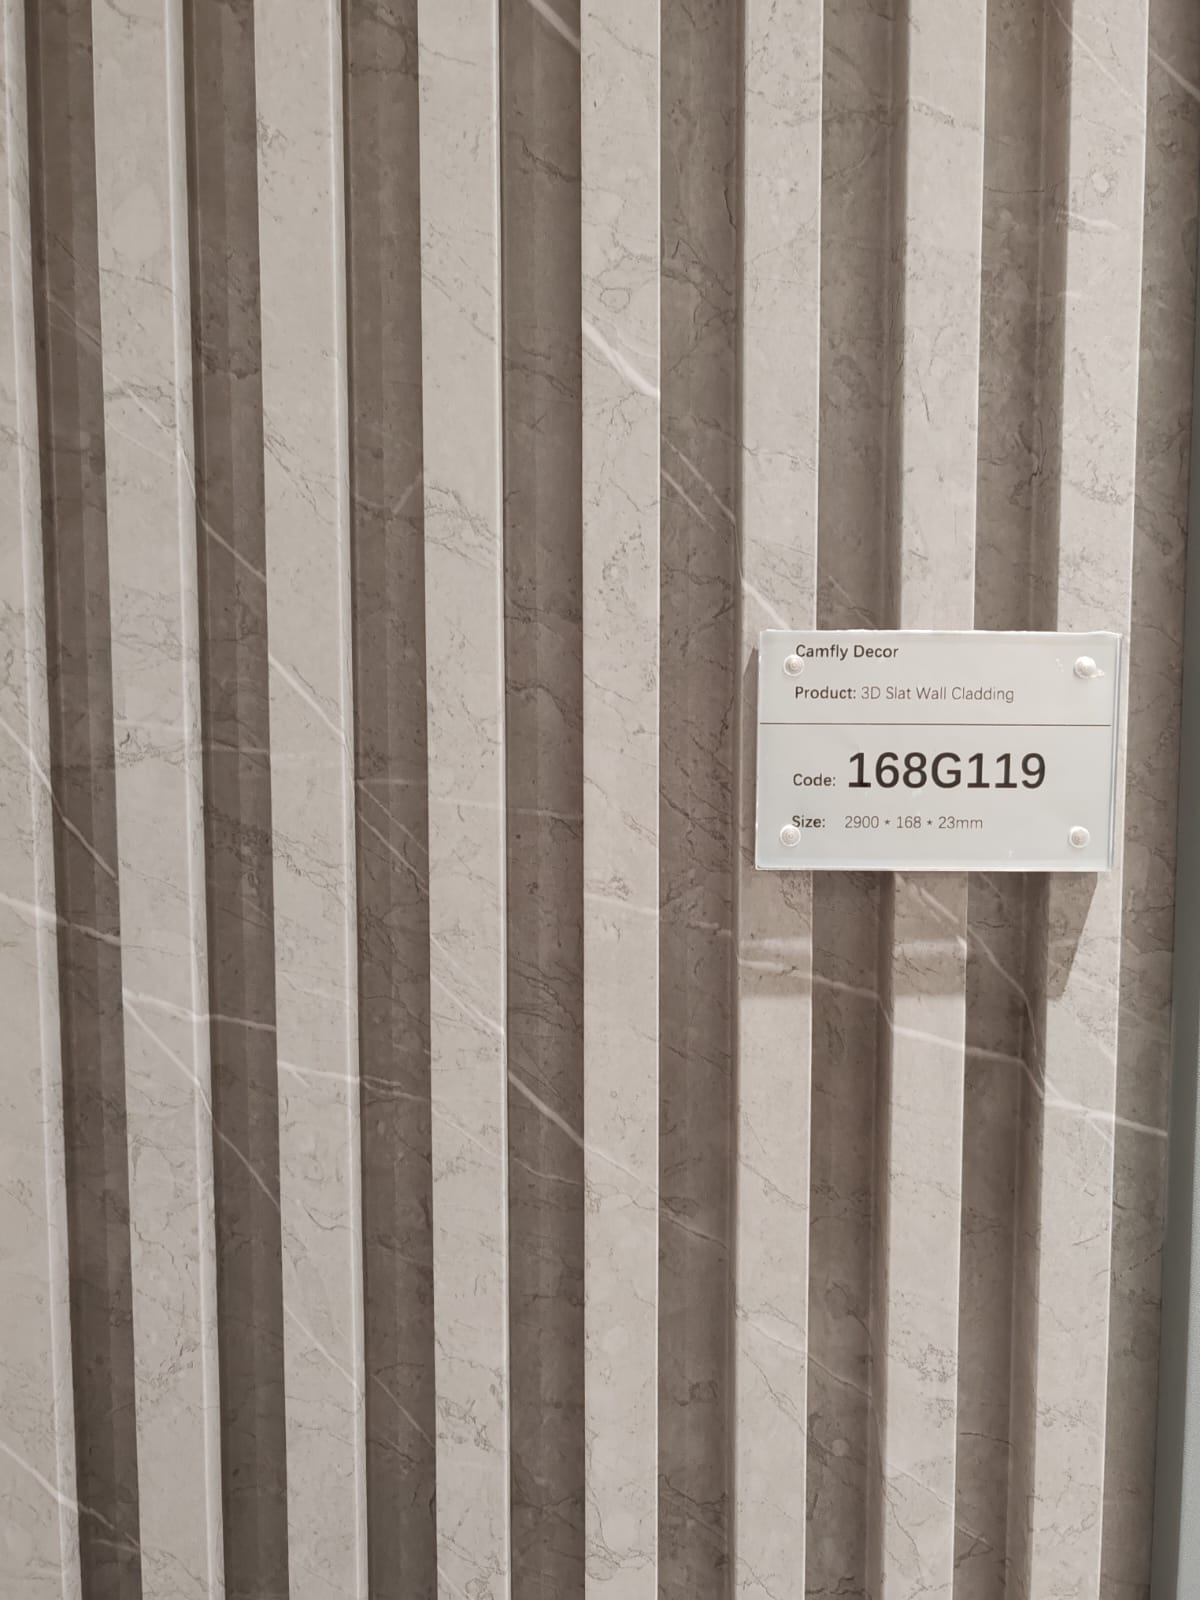 Camfly 168G119 Marble Fluted Slat Wall Cladding Length: 2900mm, Width: 170mm, Thickness: 23mm